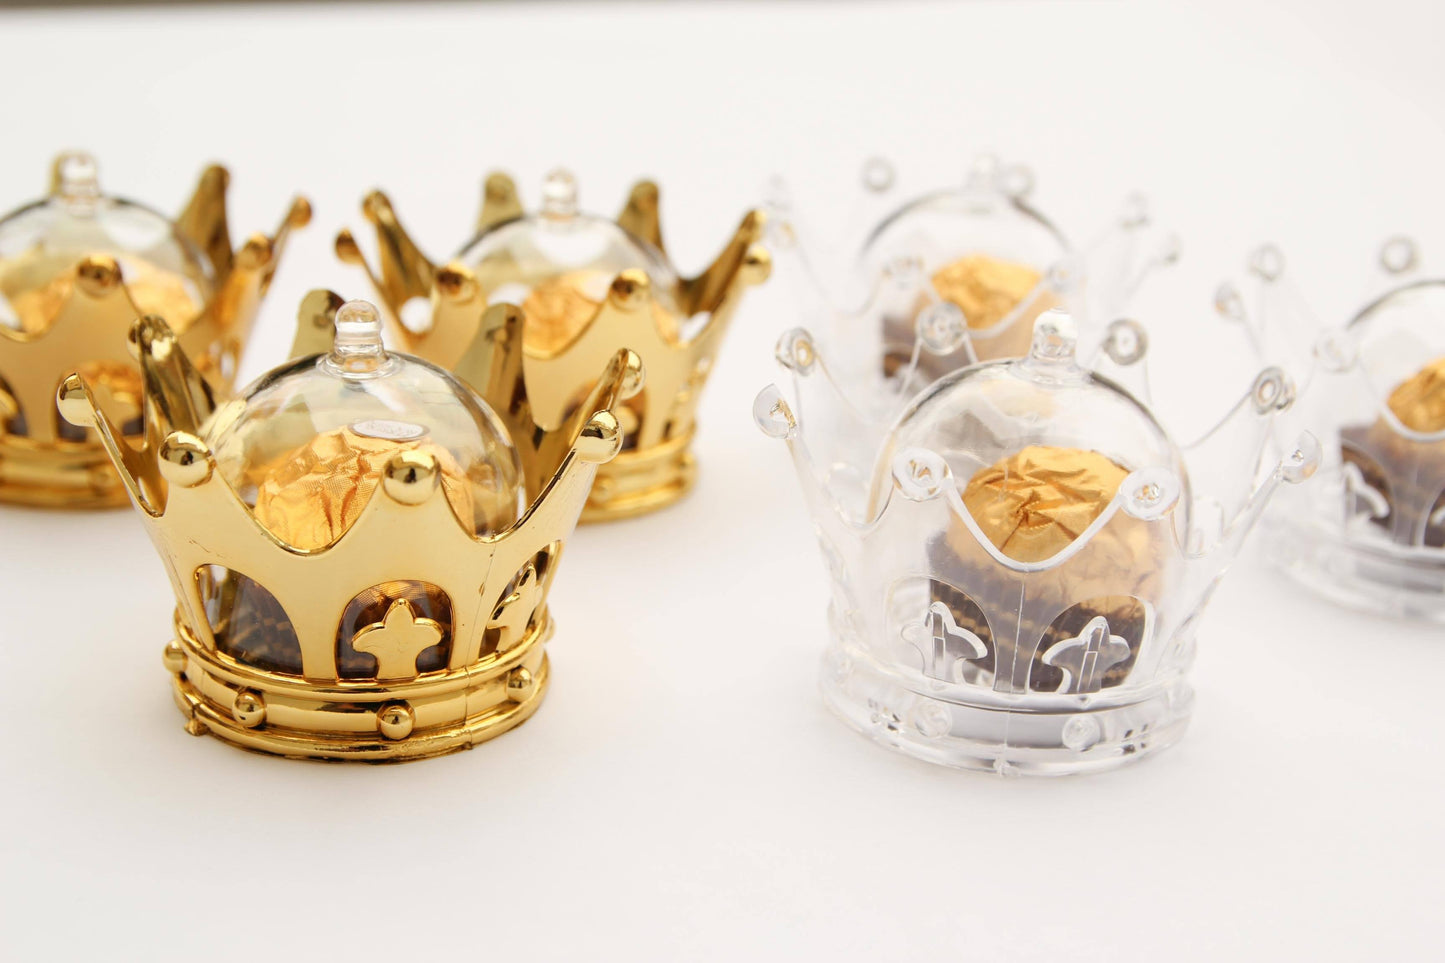 YASYU 12 PCS Gold Crown Candy Boxes with Dome, Crown Party Favor